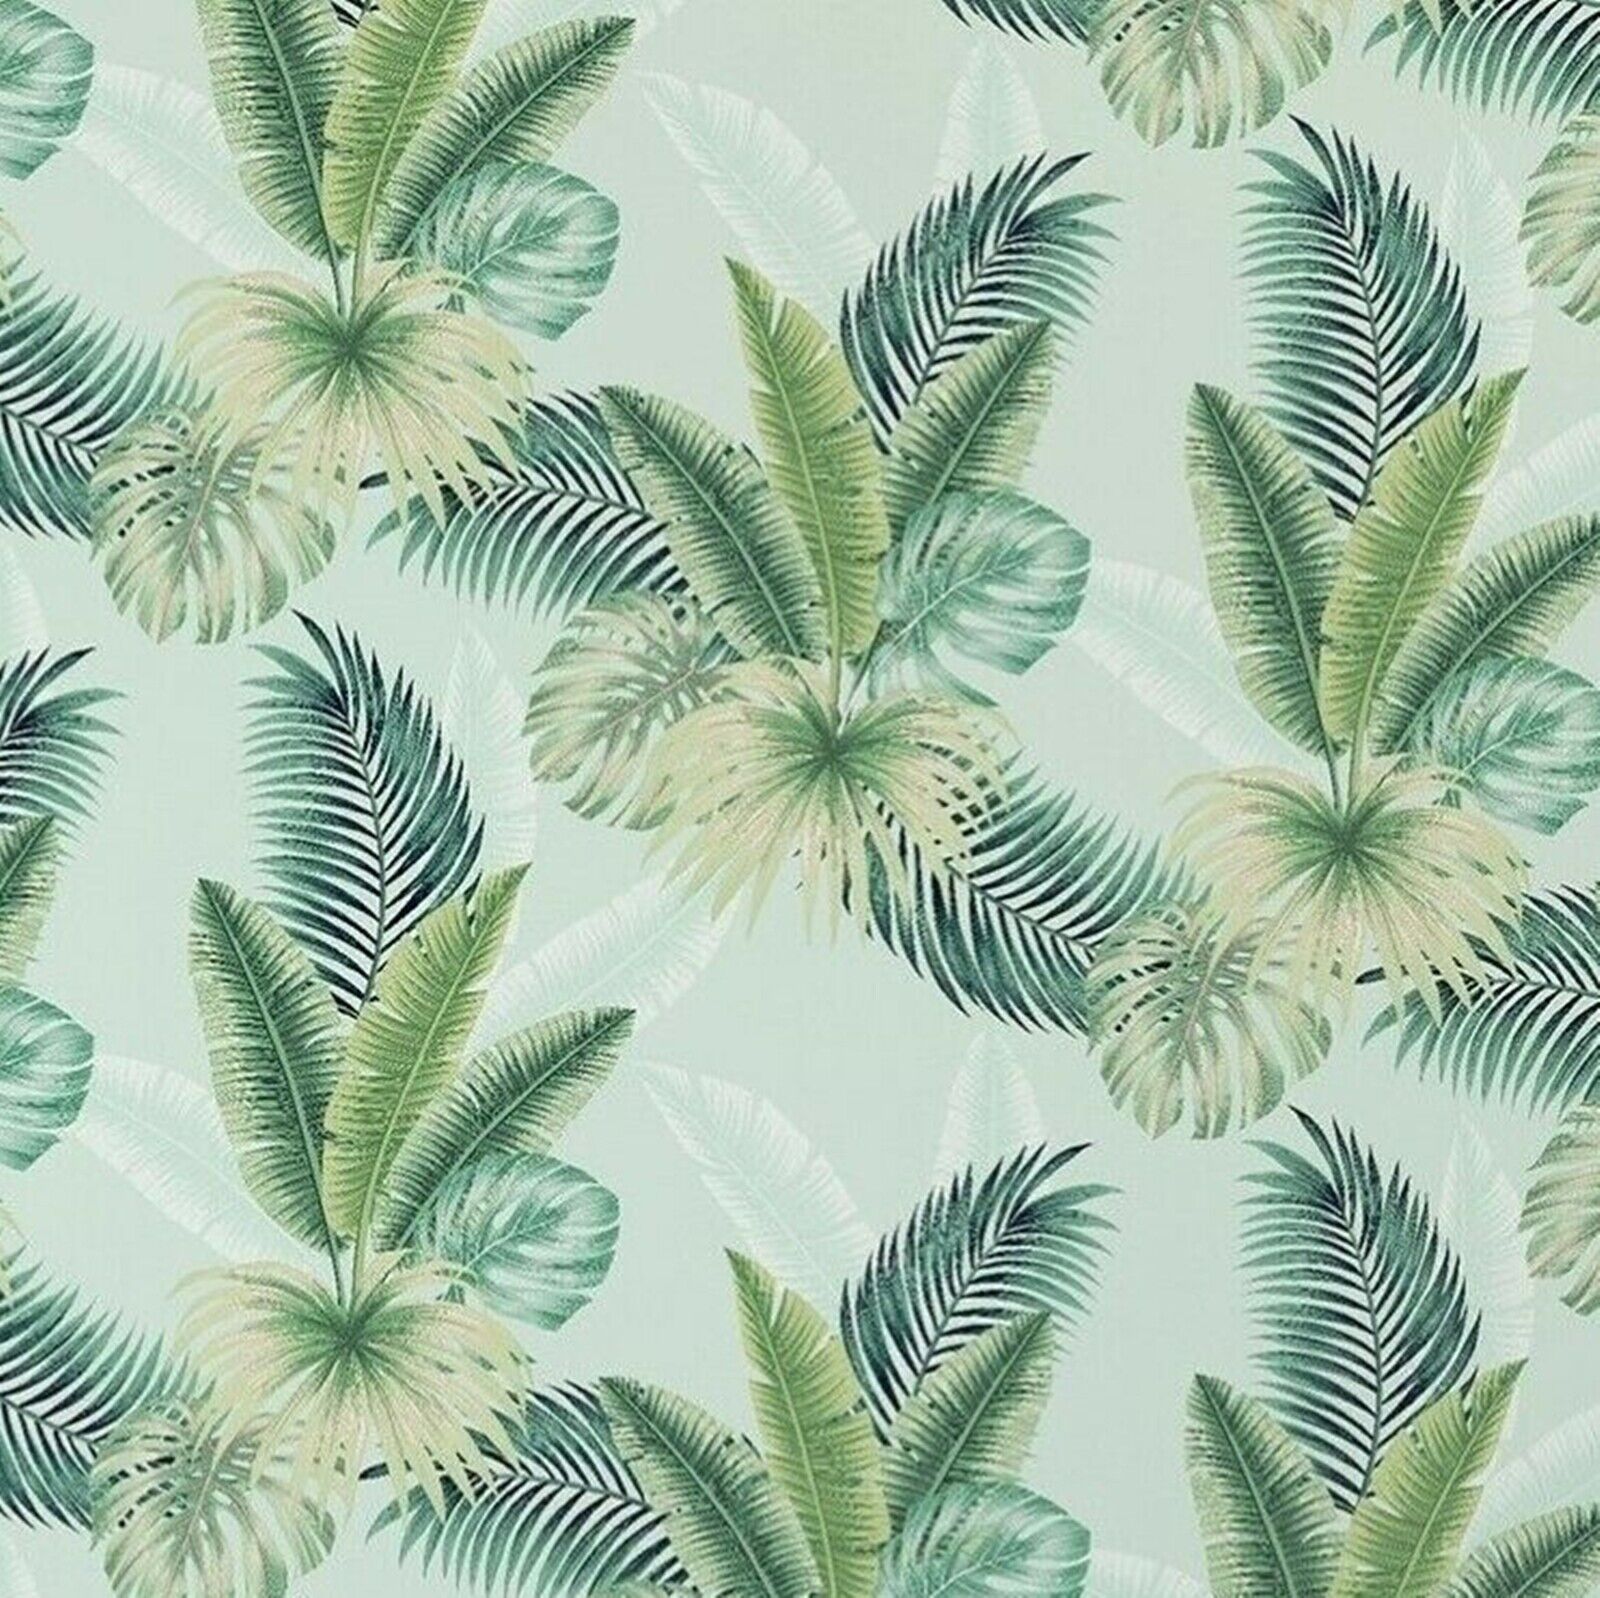 A tropical palm wallpaper with a blue background - Light green, soft green